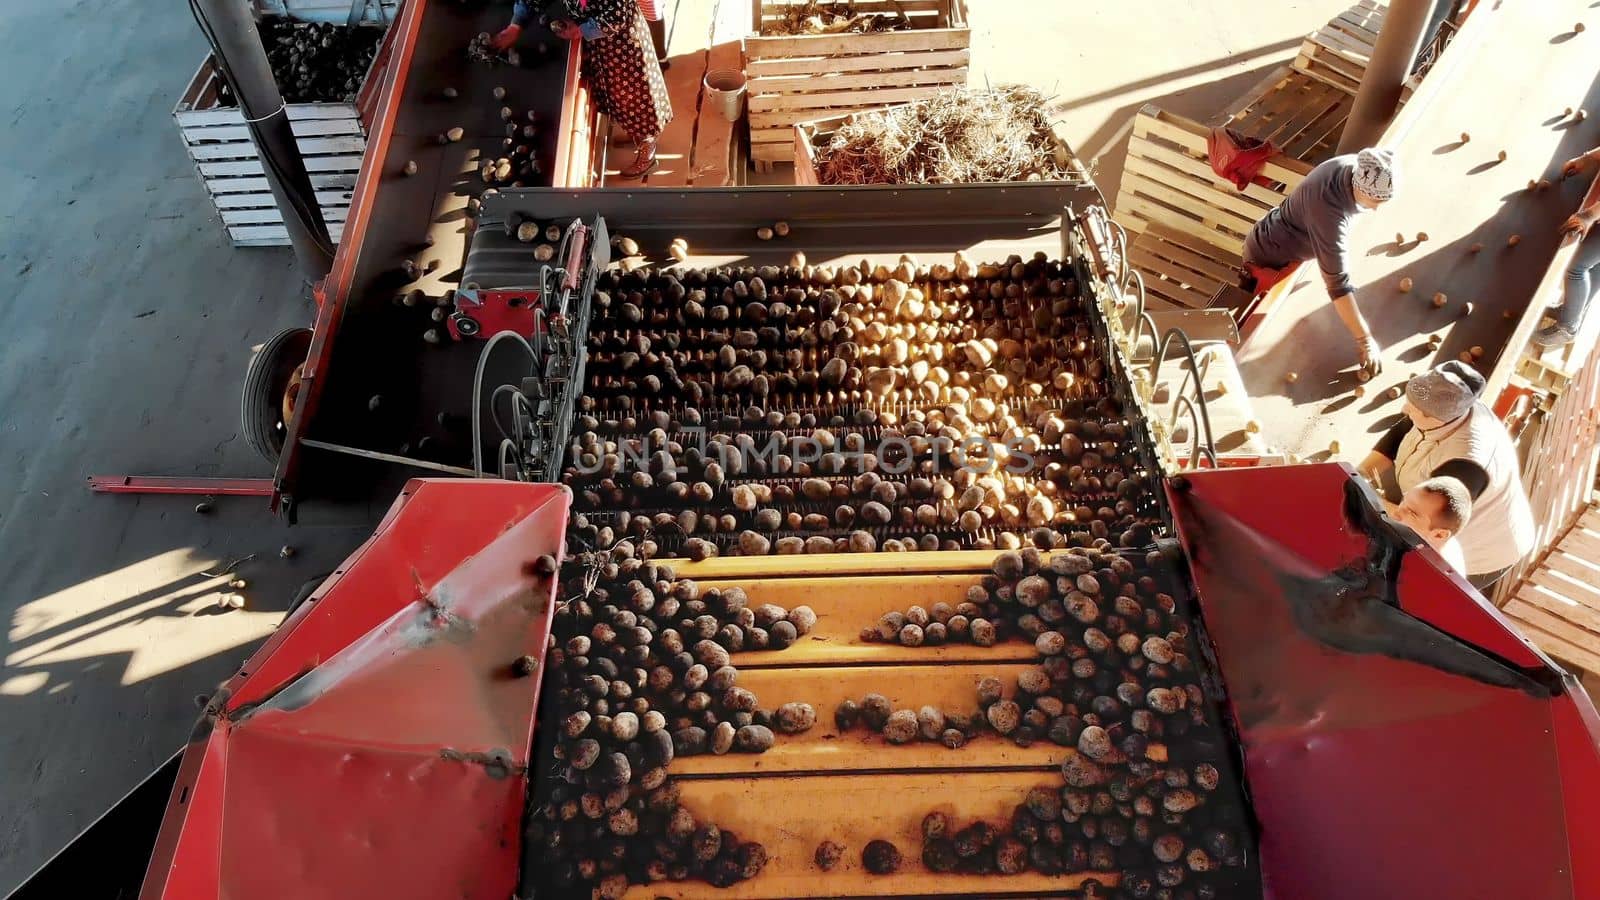 top view. special mechanized process of Potato sorting at farm. potatoes are unloaded on conveyor belt, and workers are sifting potatoes manually. potatoes are put in wooden boxes for packaging. by djtreneryay